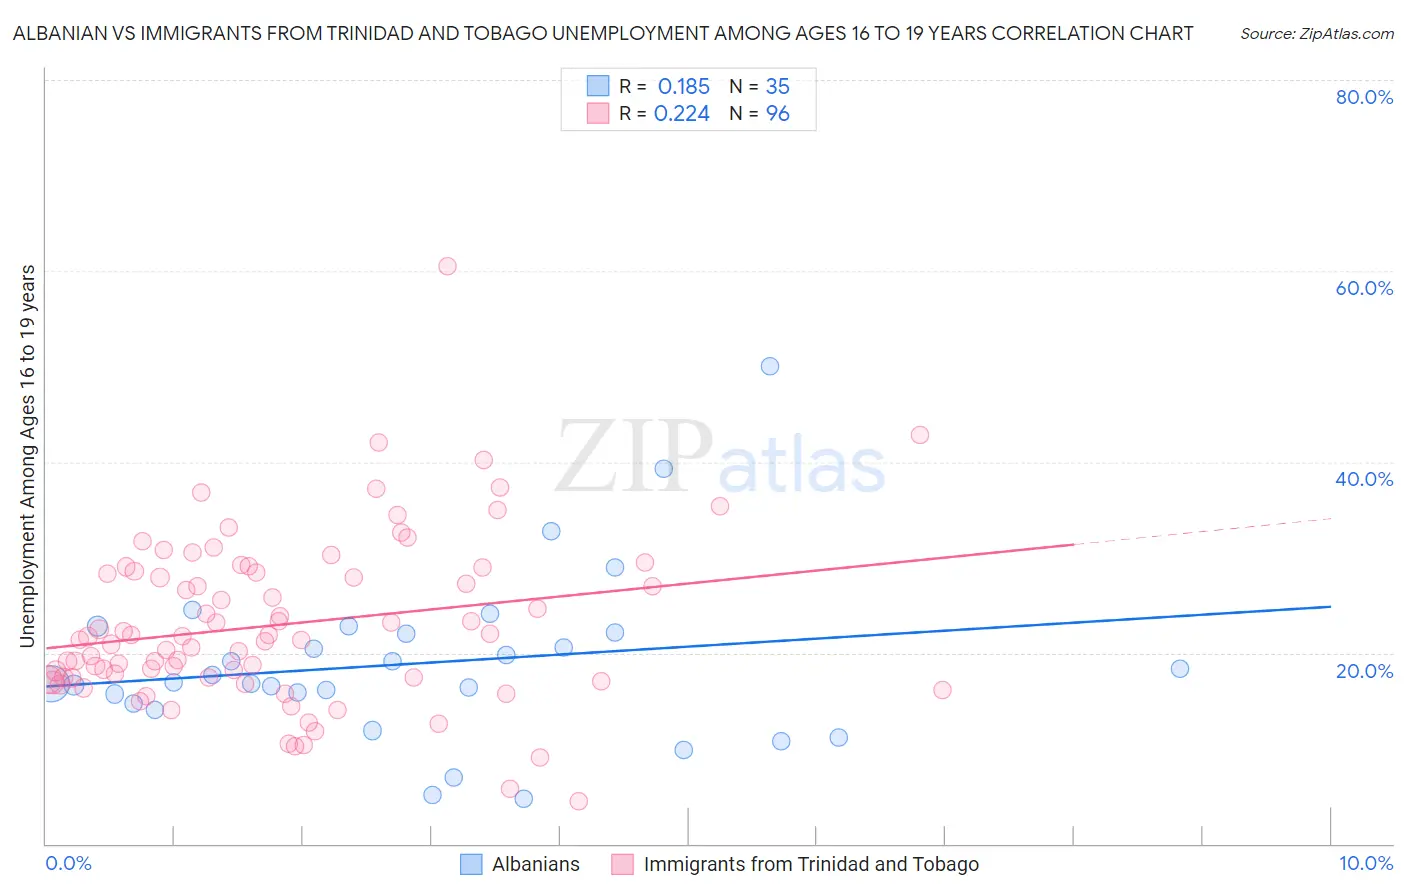 Albanian vs Immigrants from Trinidad and Tobago Unemployment Among Ages 16 to 19 years